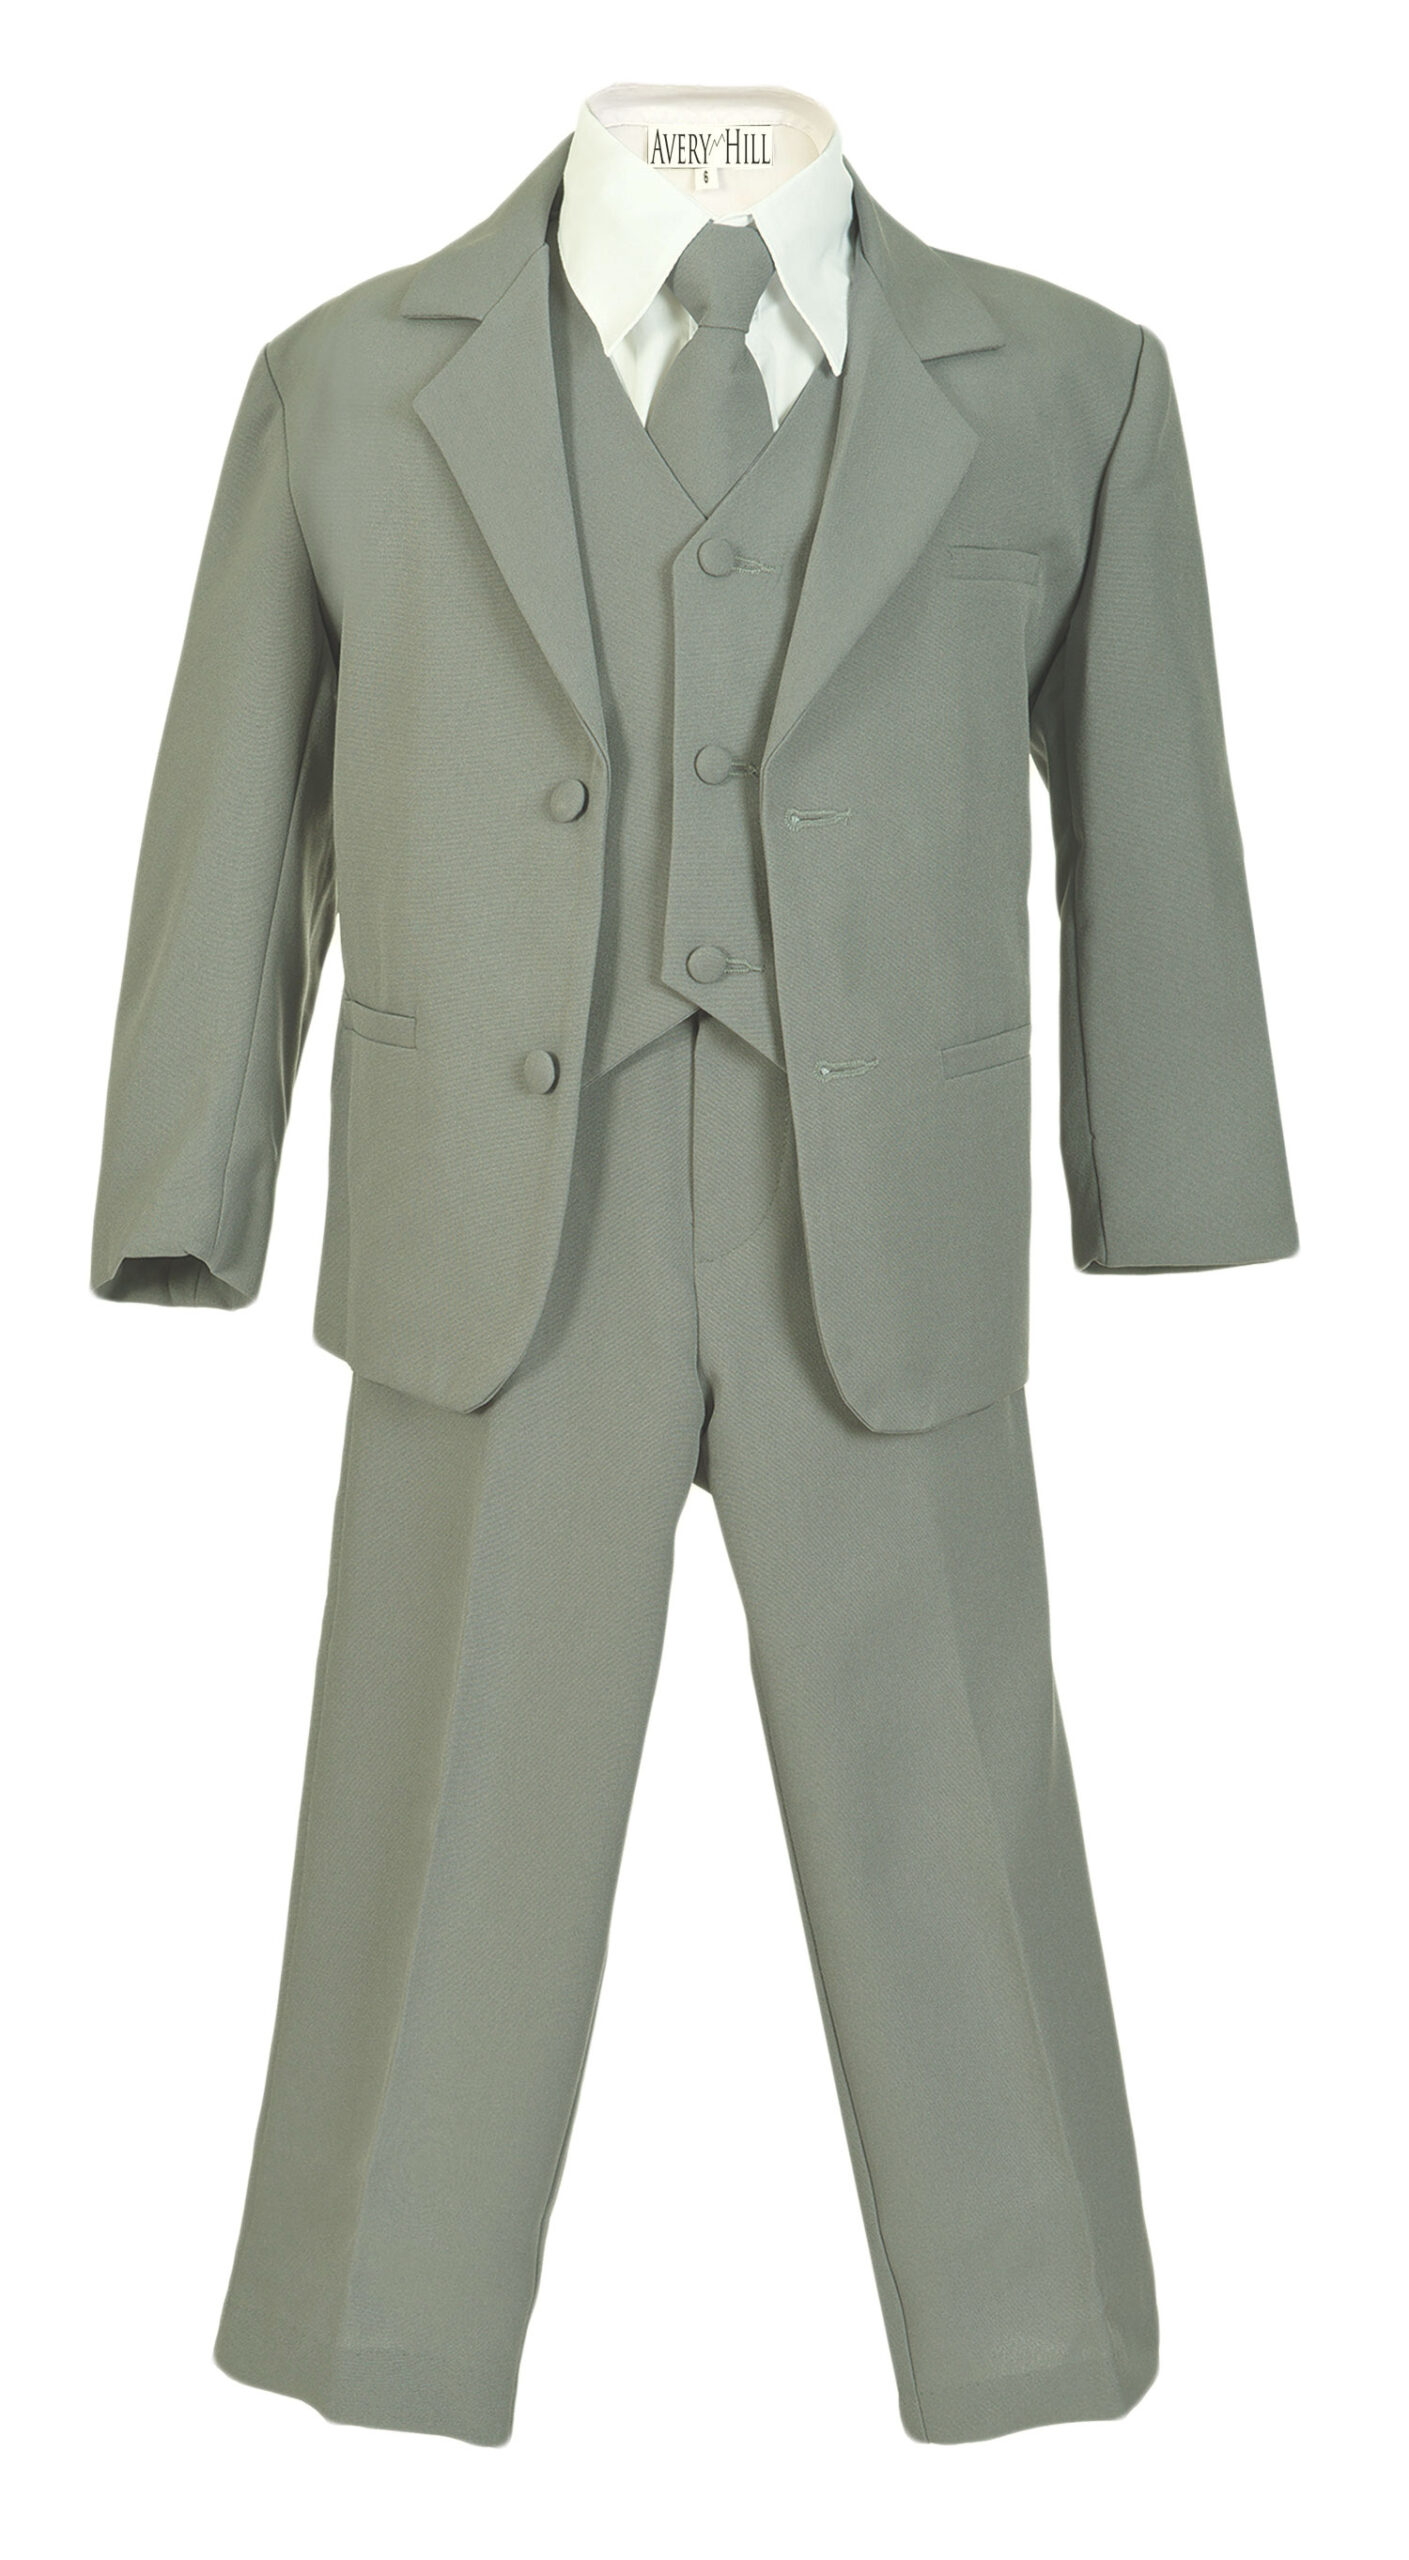 Avery Hill Boys Formal 5 Piece Suit with Shirt and Vest Silver White - 2T